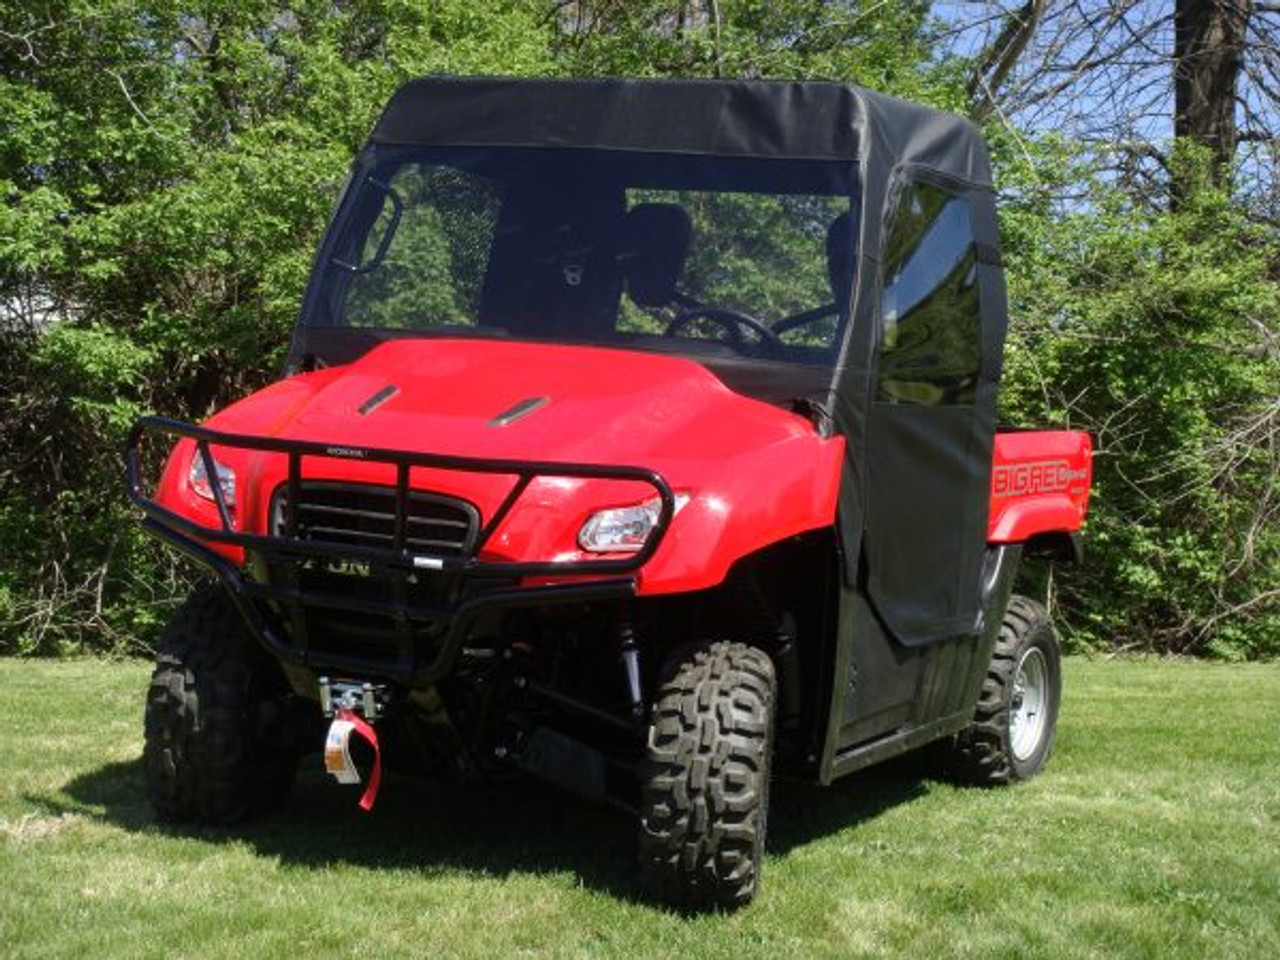 3 Star side x side Honda Big Red full cab enclosure front angle view